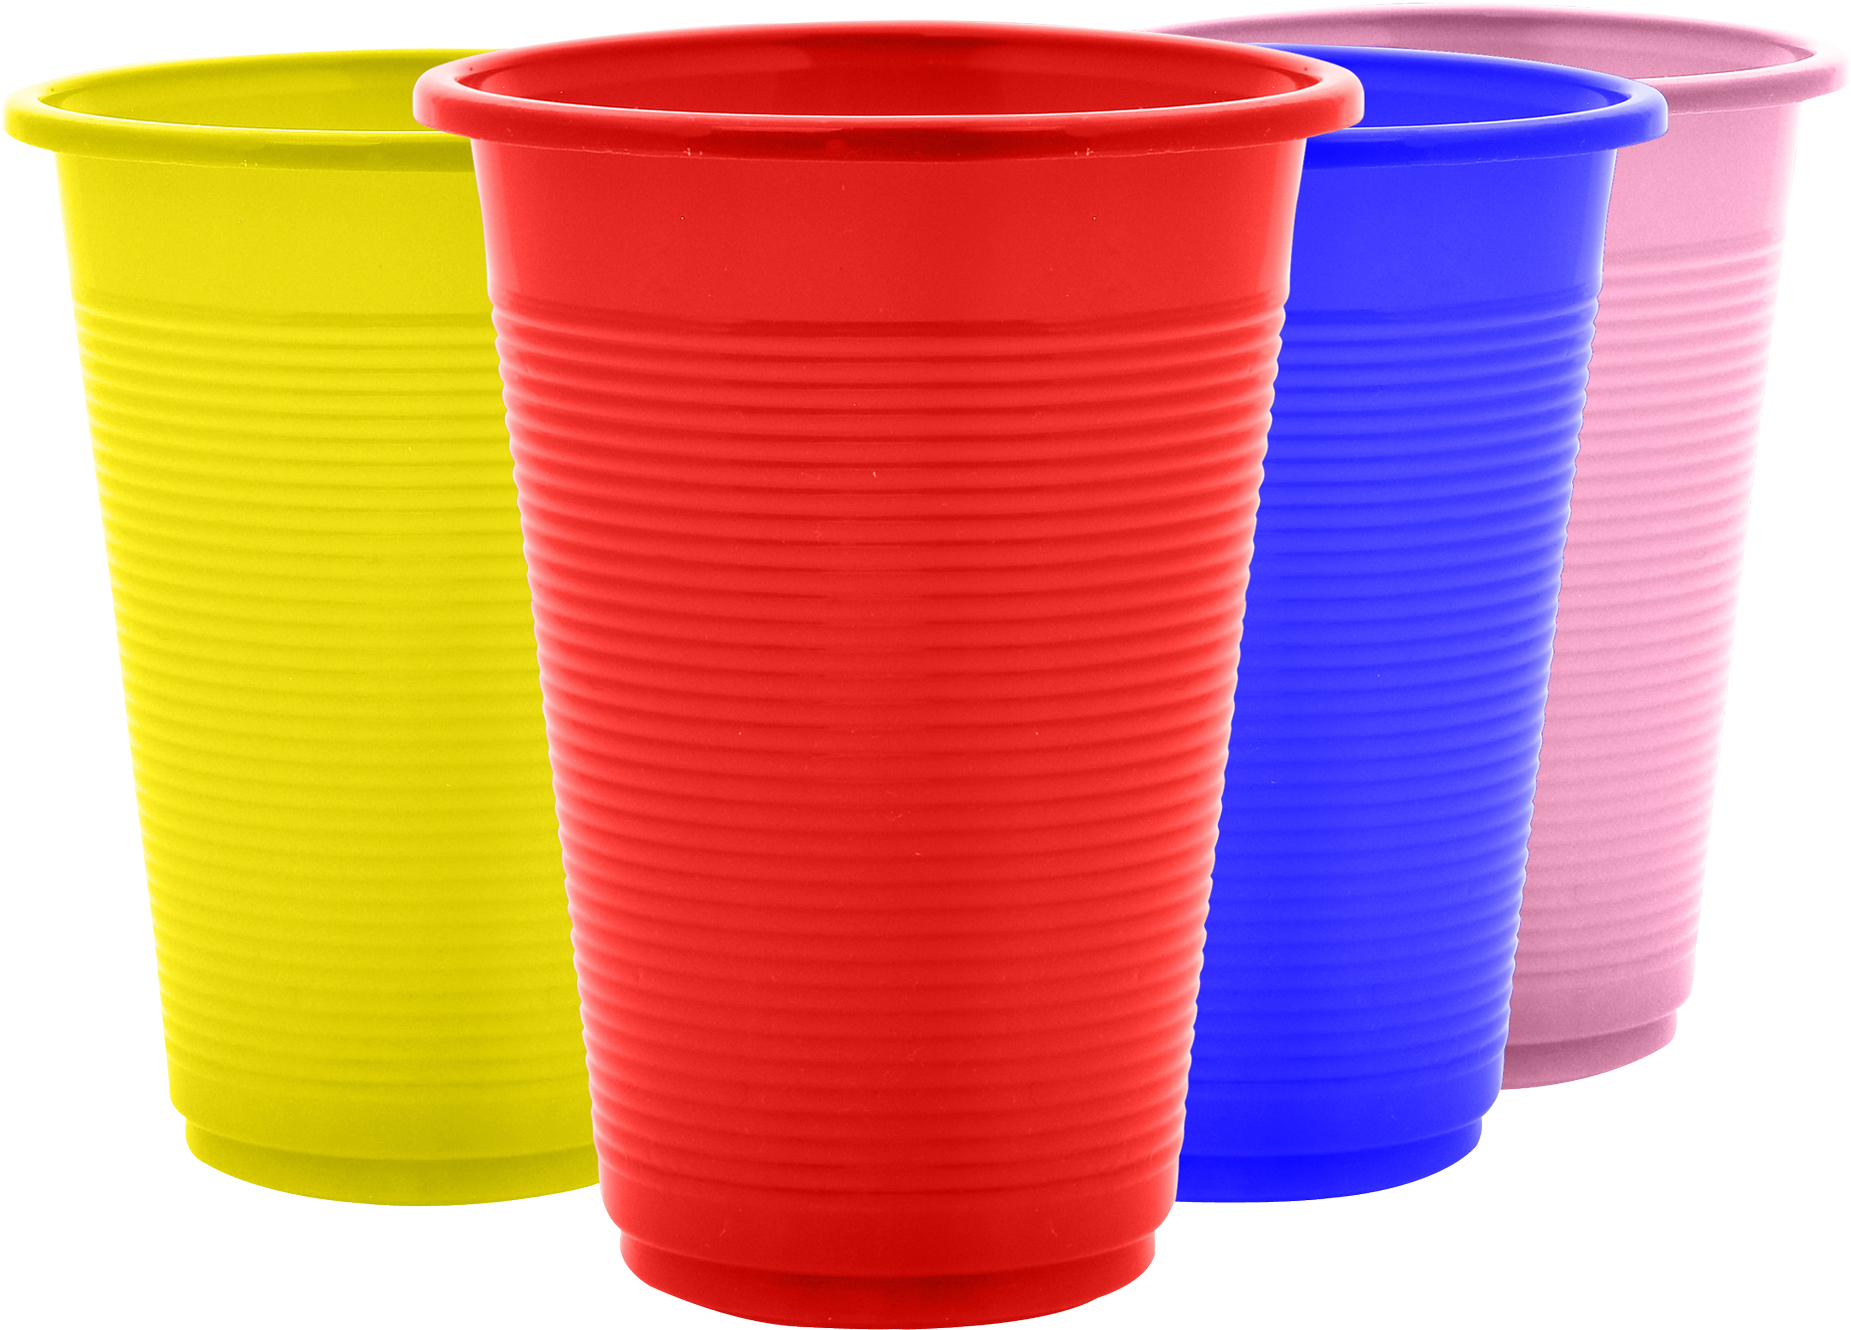 Colorful Plastic Cups Array PNG image